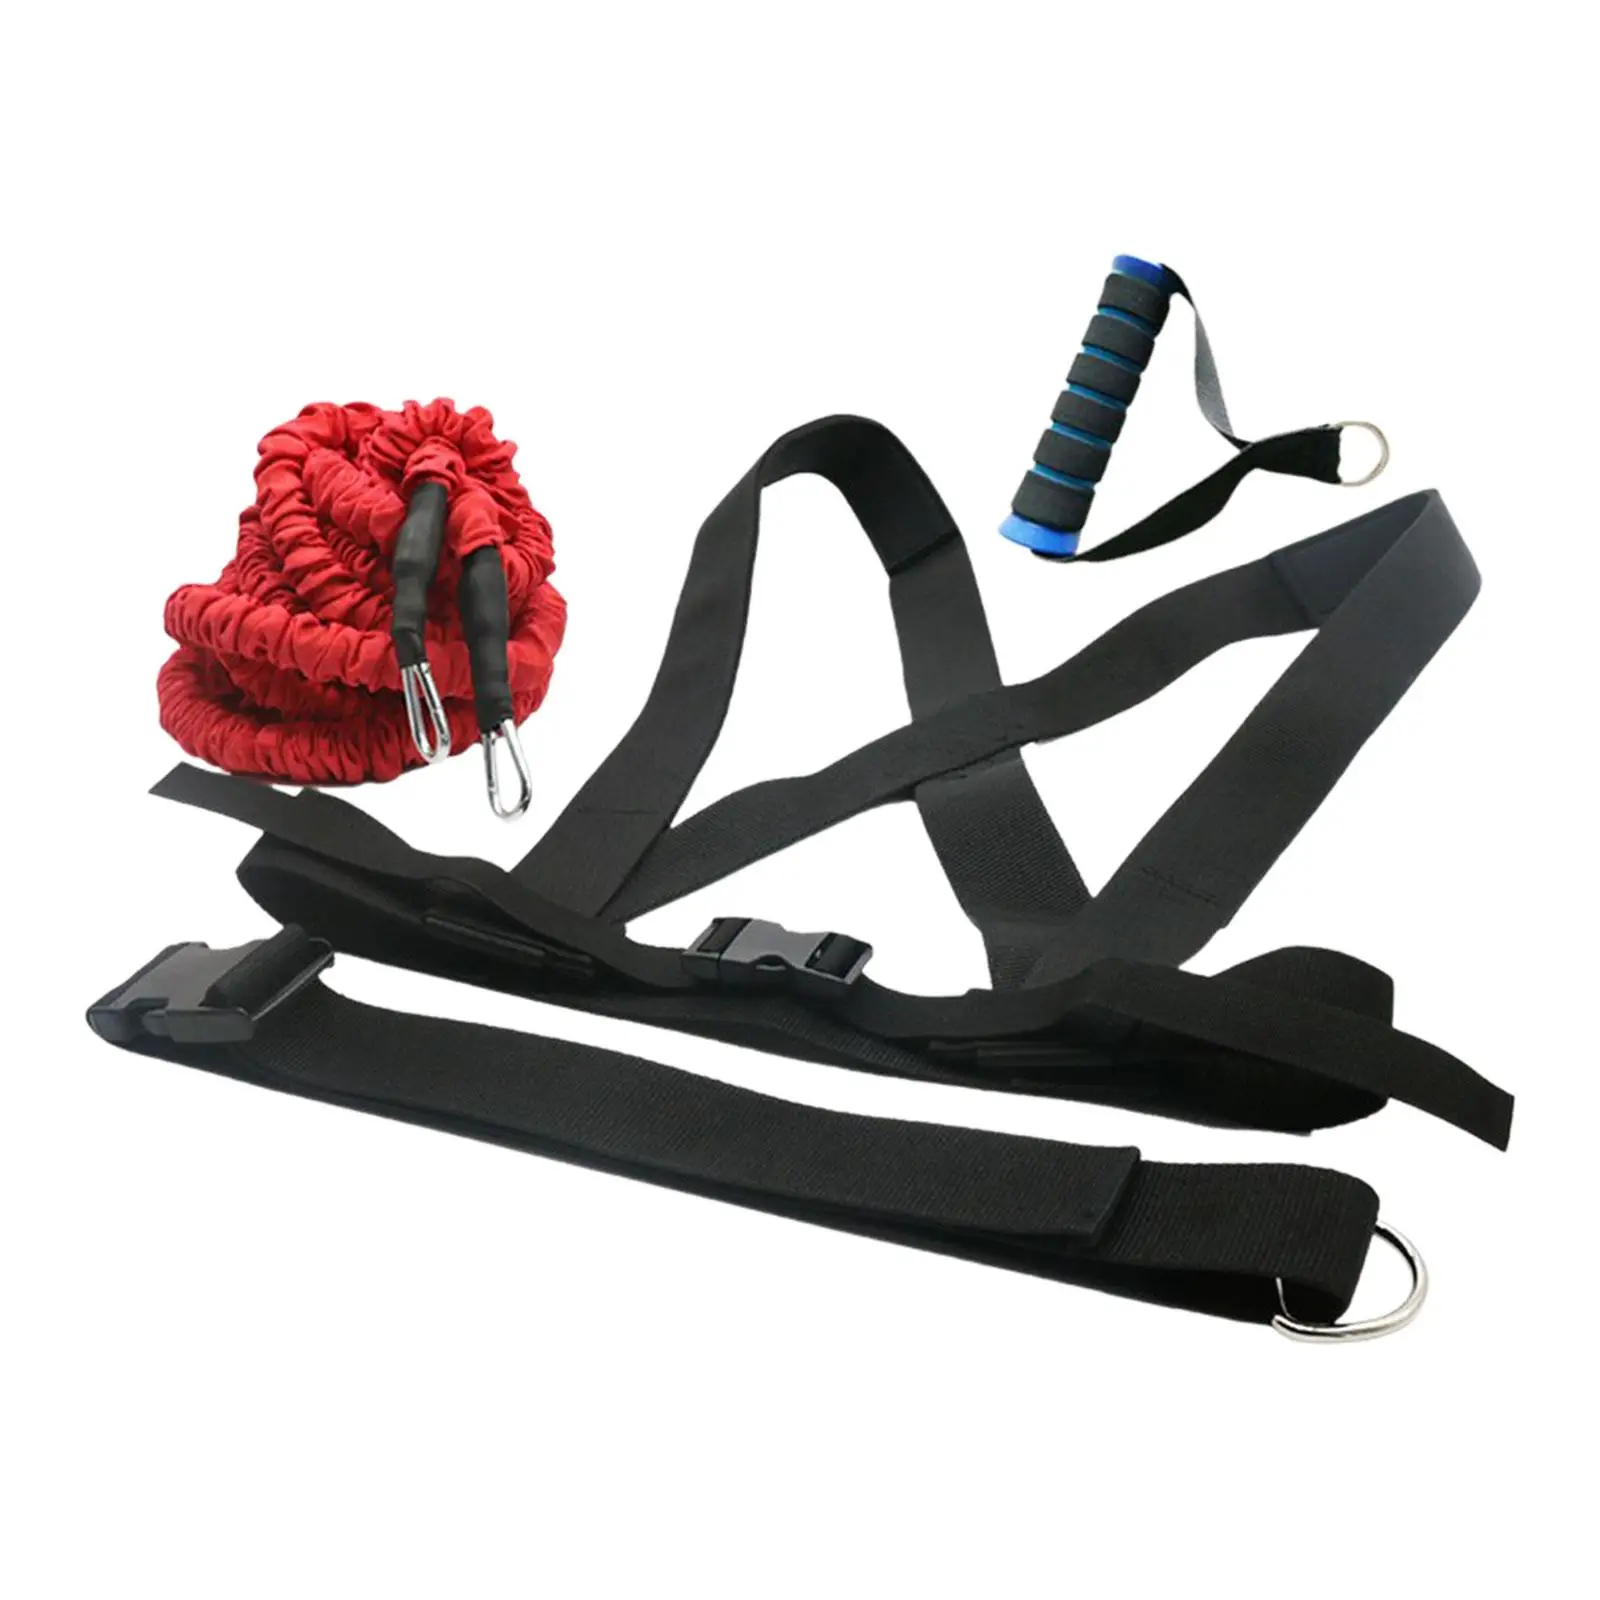 Physical Training Resistance Rope Kits Improving Speed 50lbs with Protective Sleeves Resistance Bands for Force